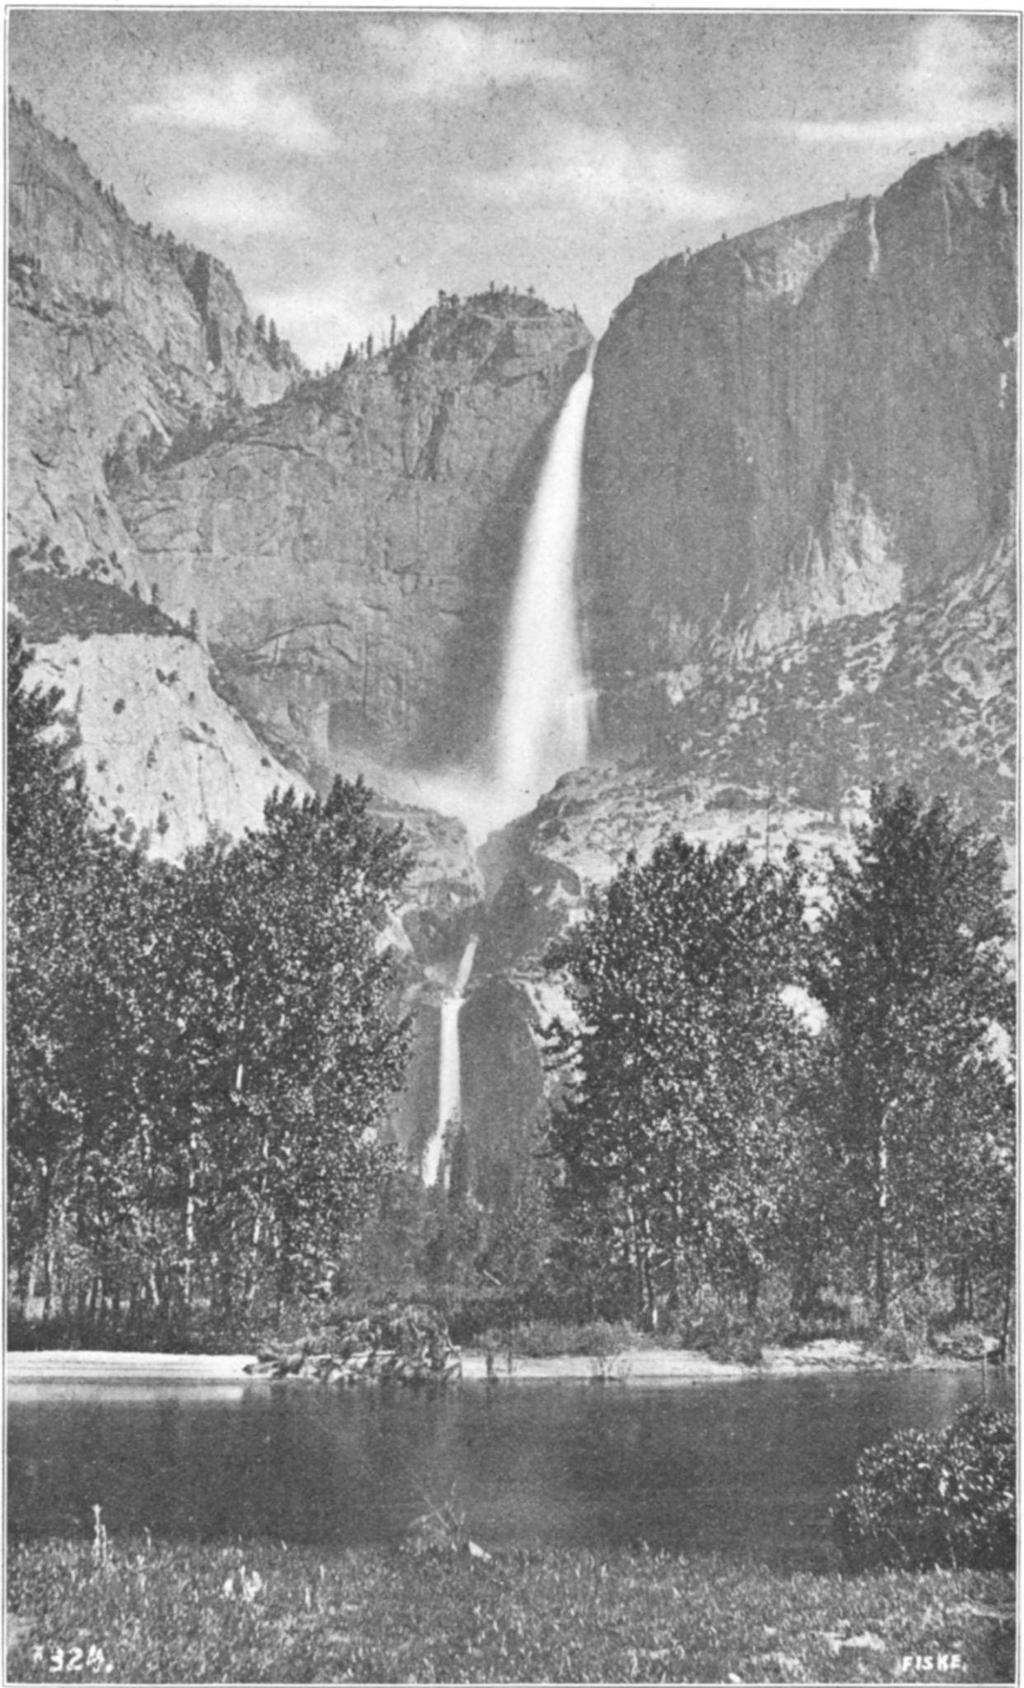 550 J. C. BRANNER FIG. 4.--The Yosemite falls seen from the valley below.